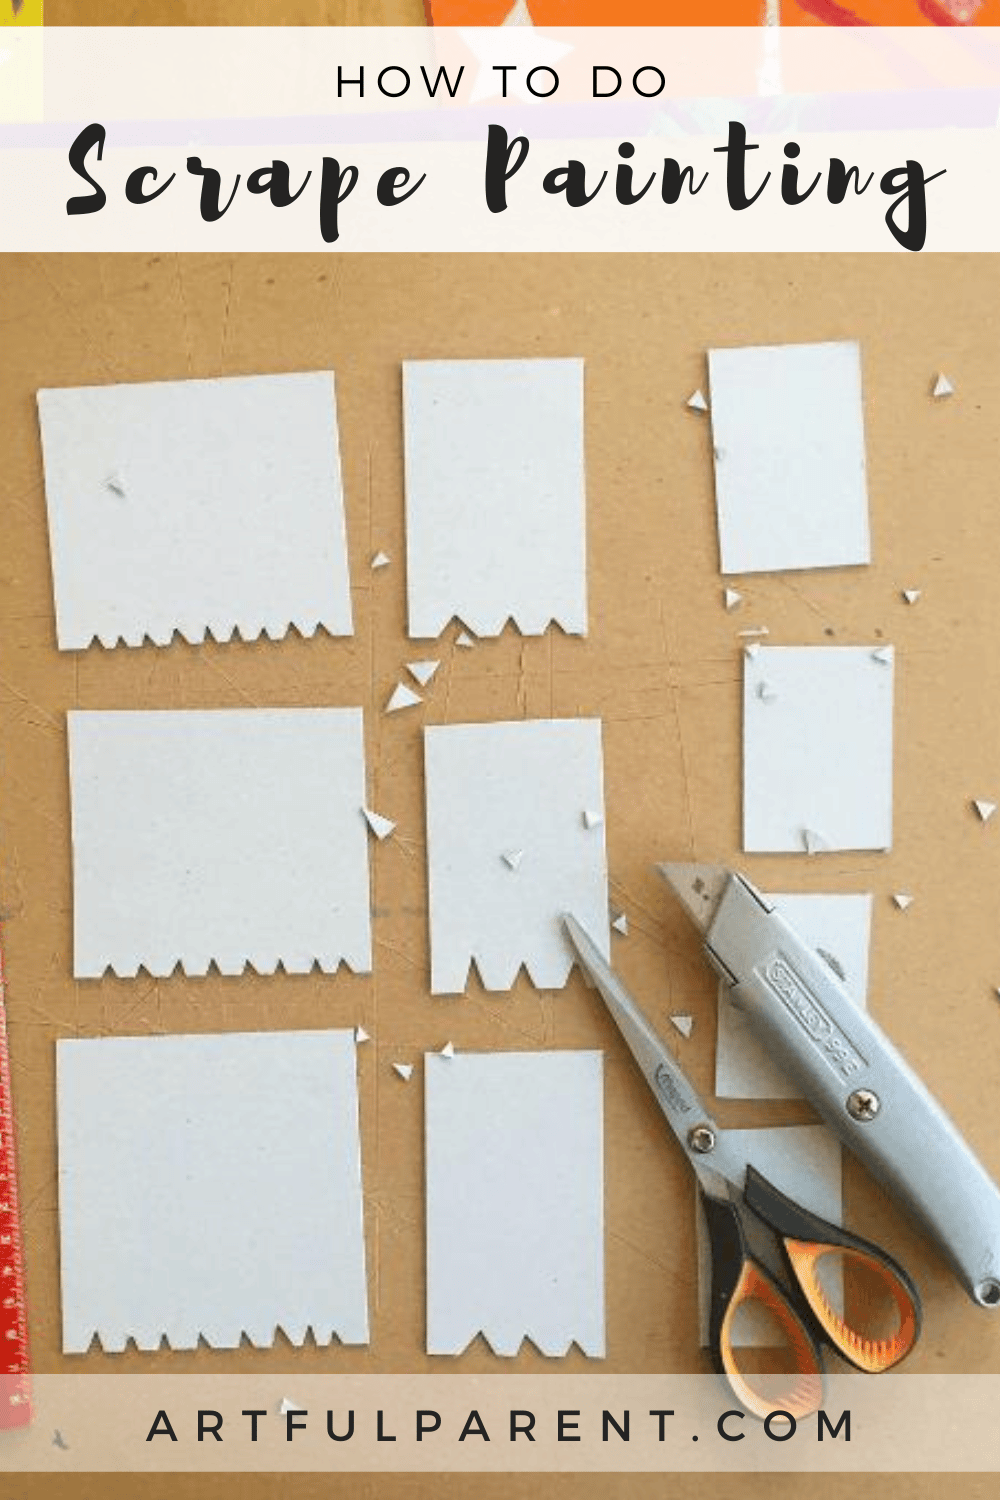 How to Do Scrape Painting